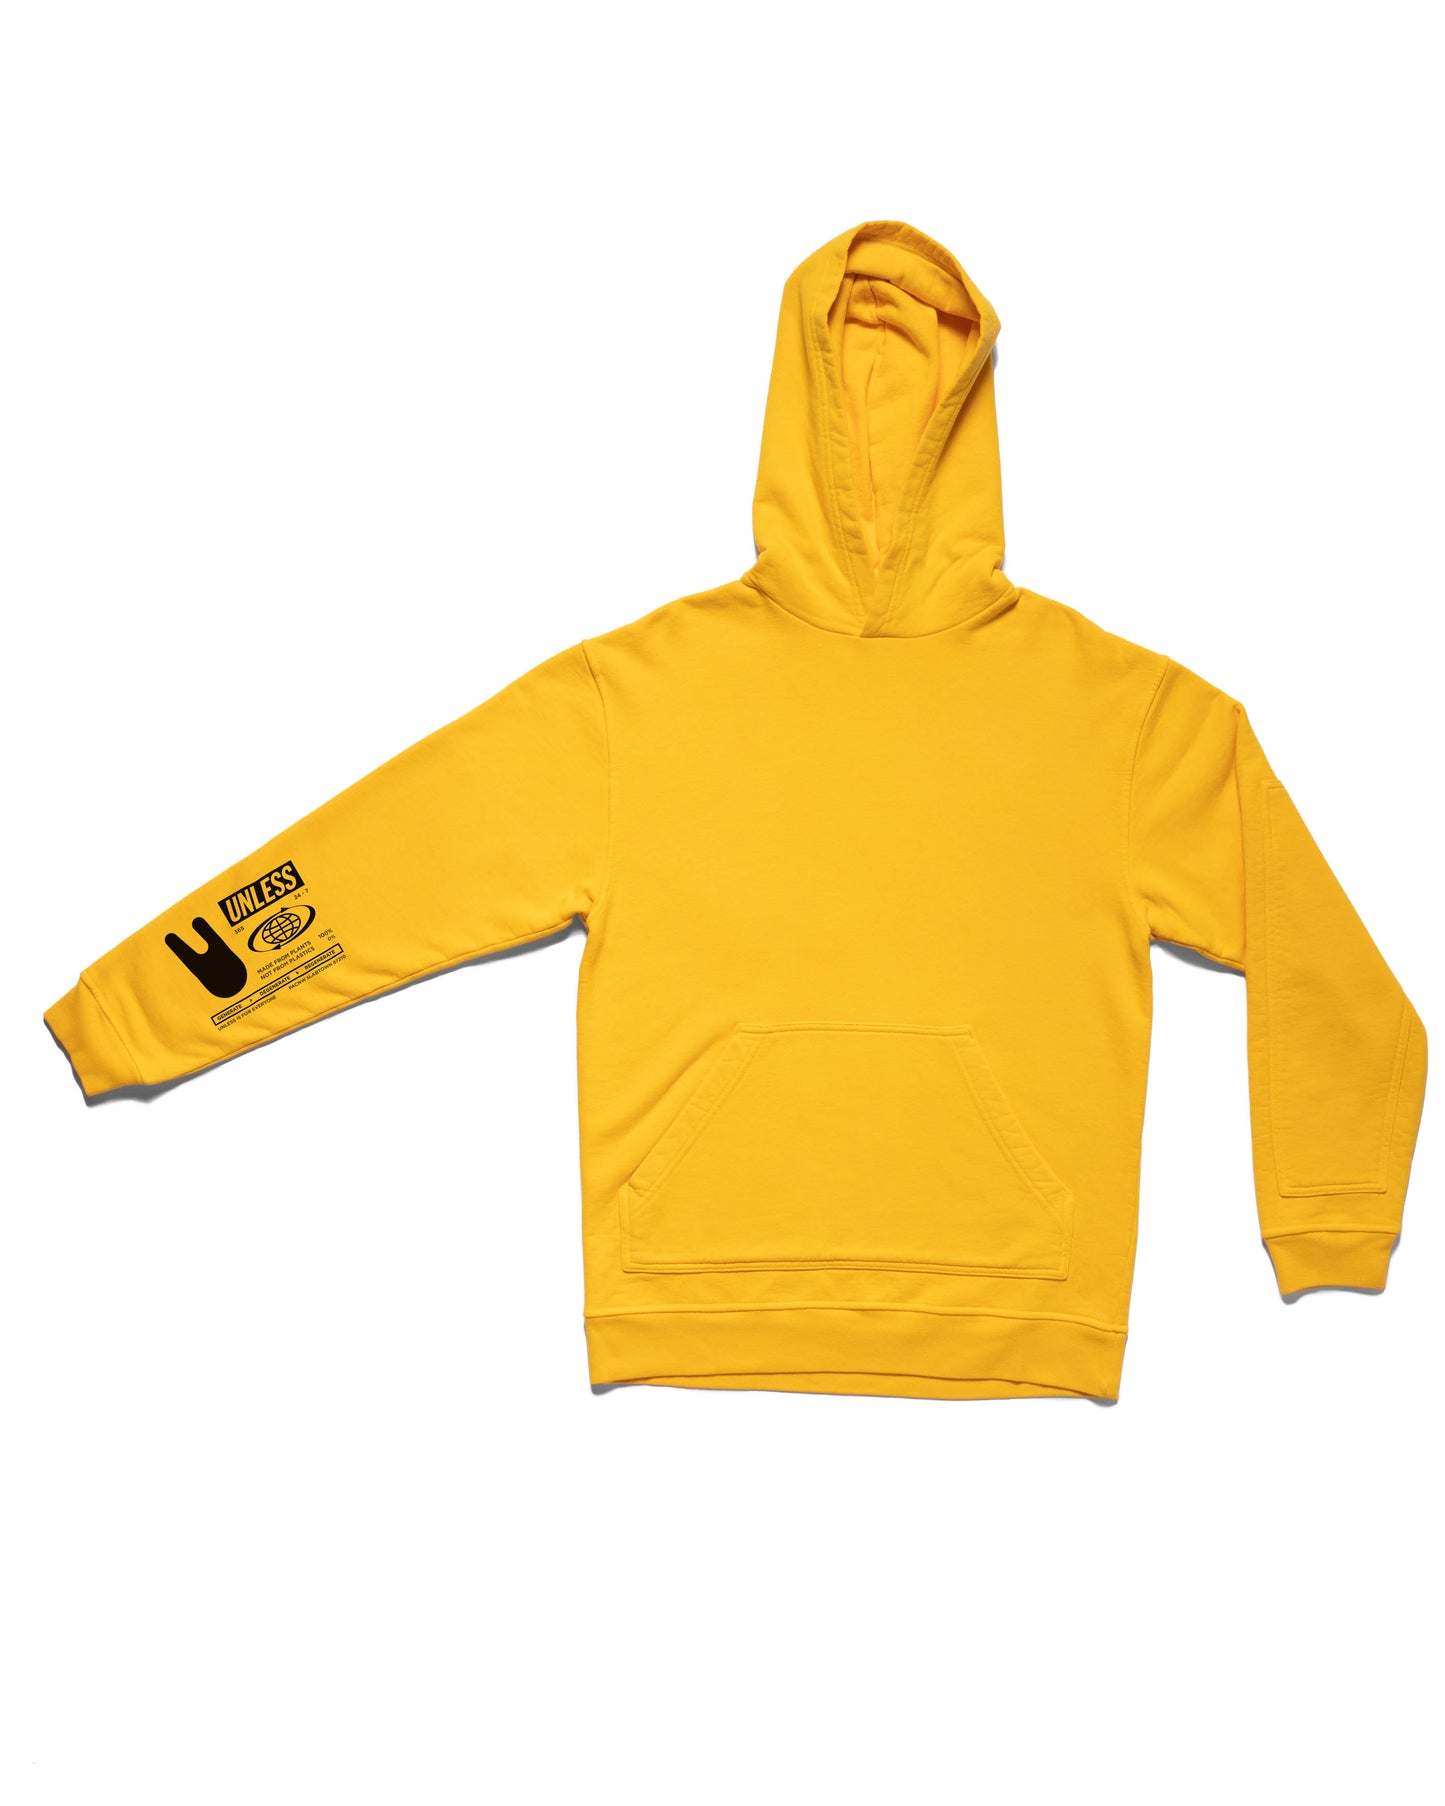 Biodegradable Info Tag Hoodie